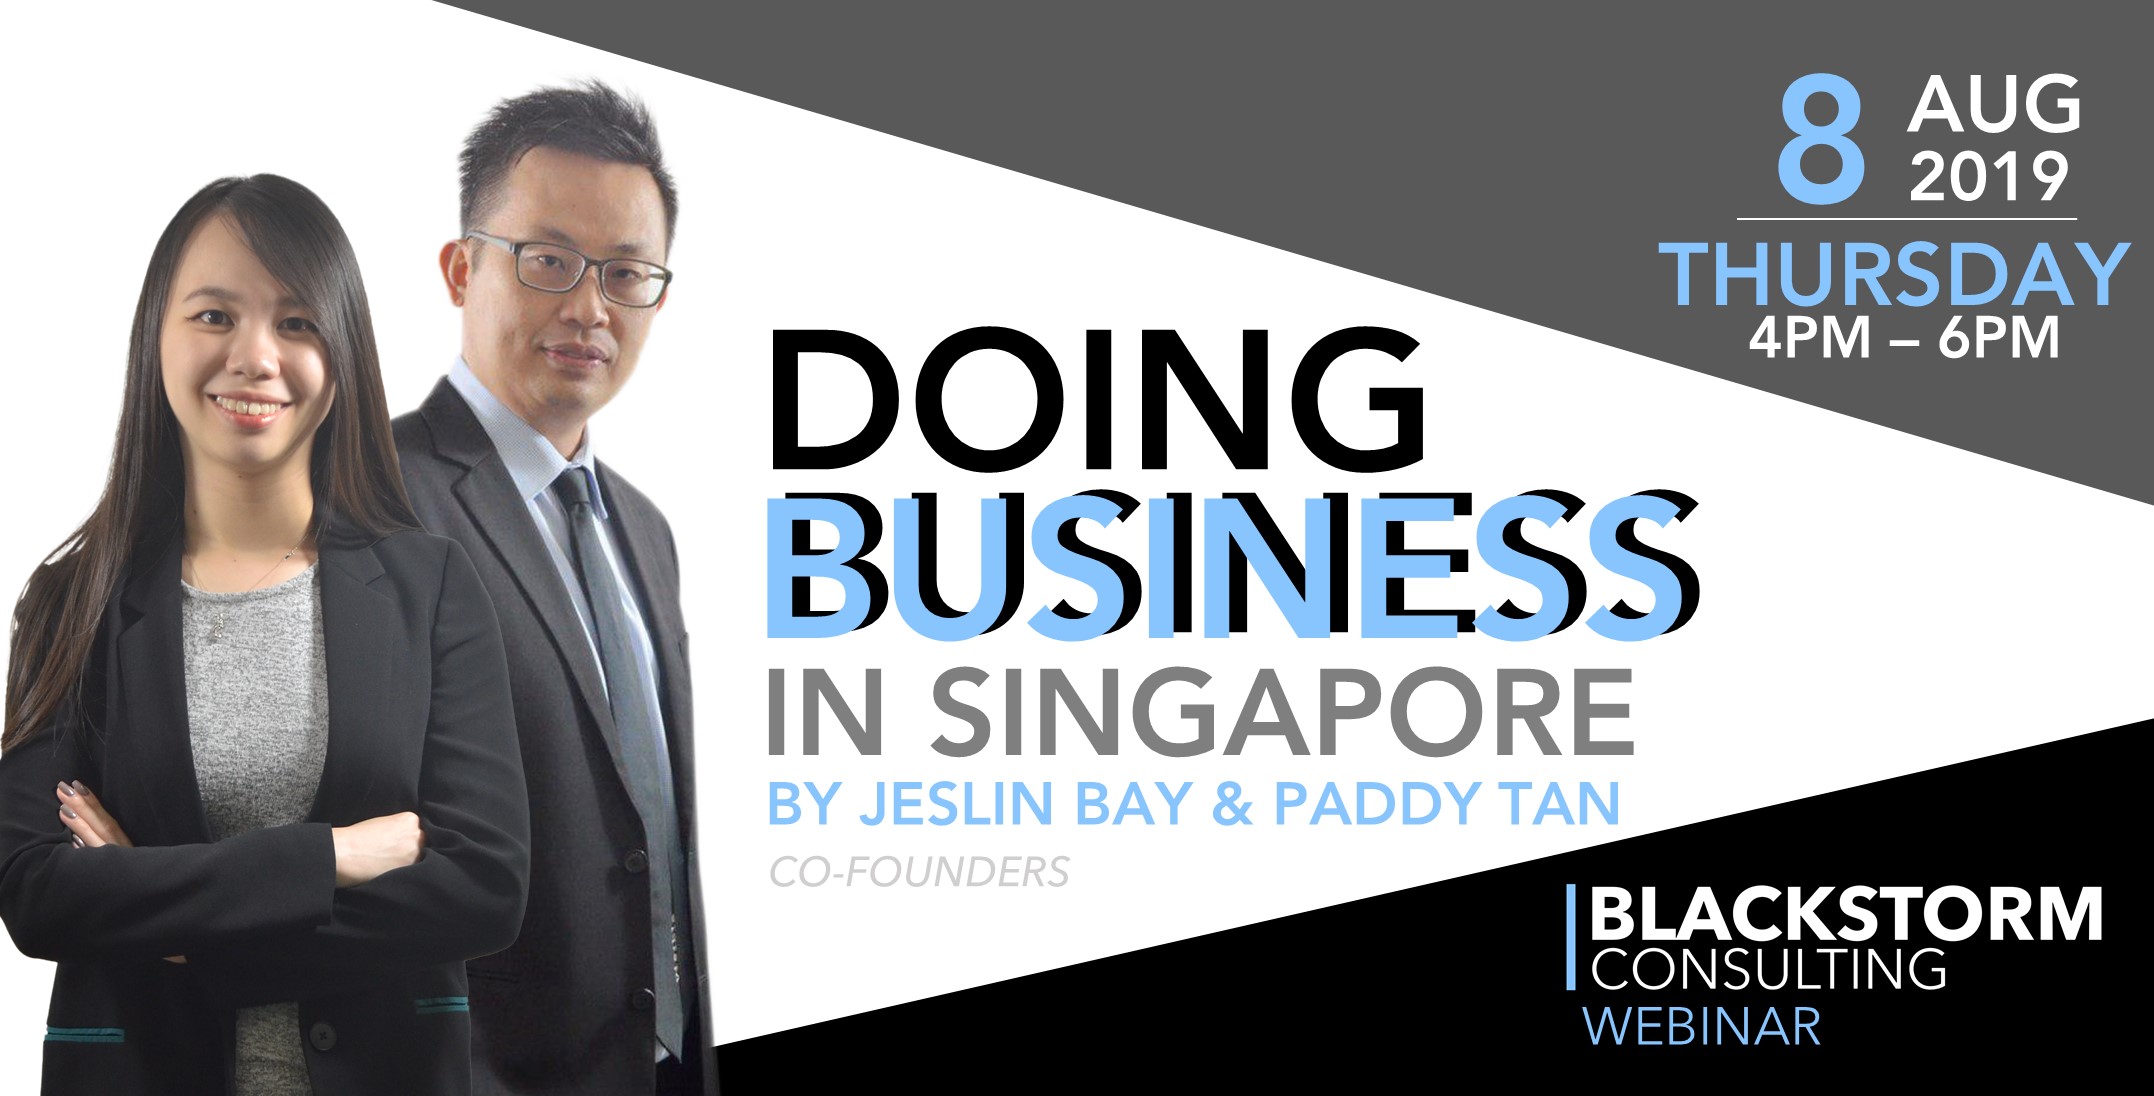 Doing Business in Singapore | BlackStorm Consulting